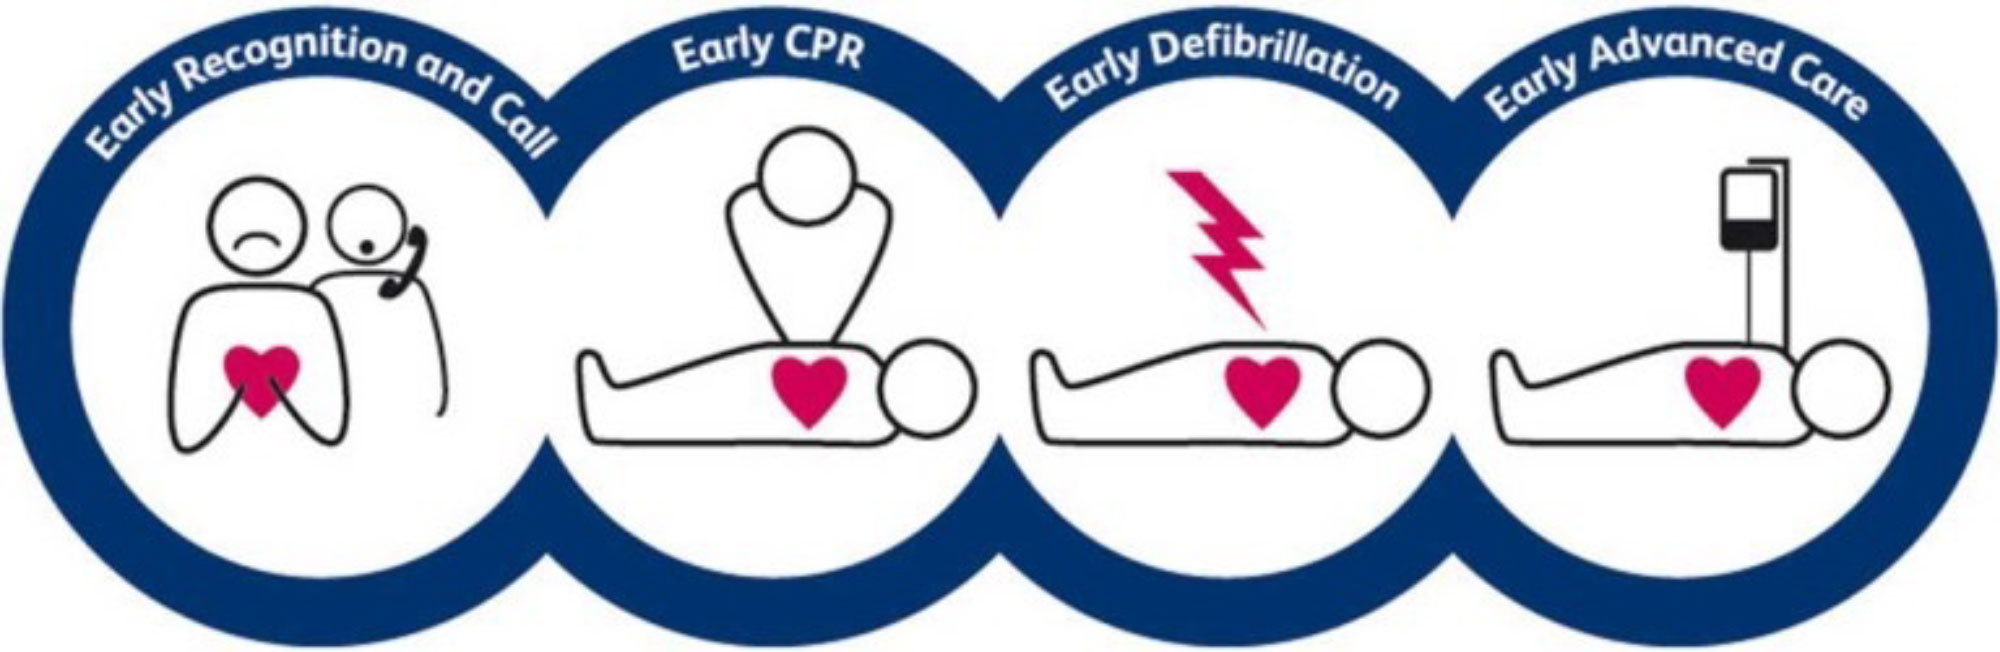 CPR chart